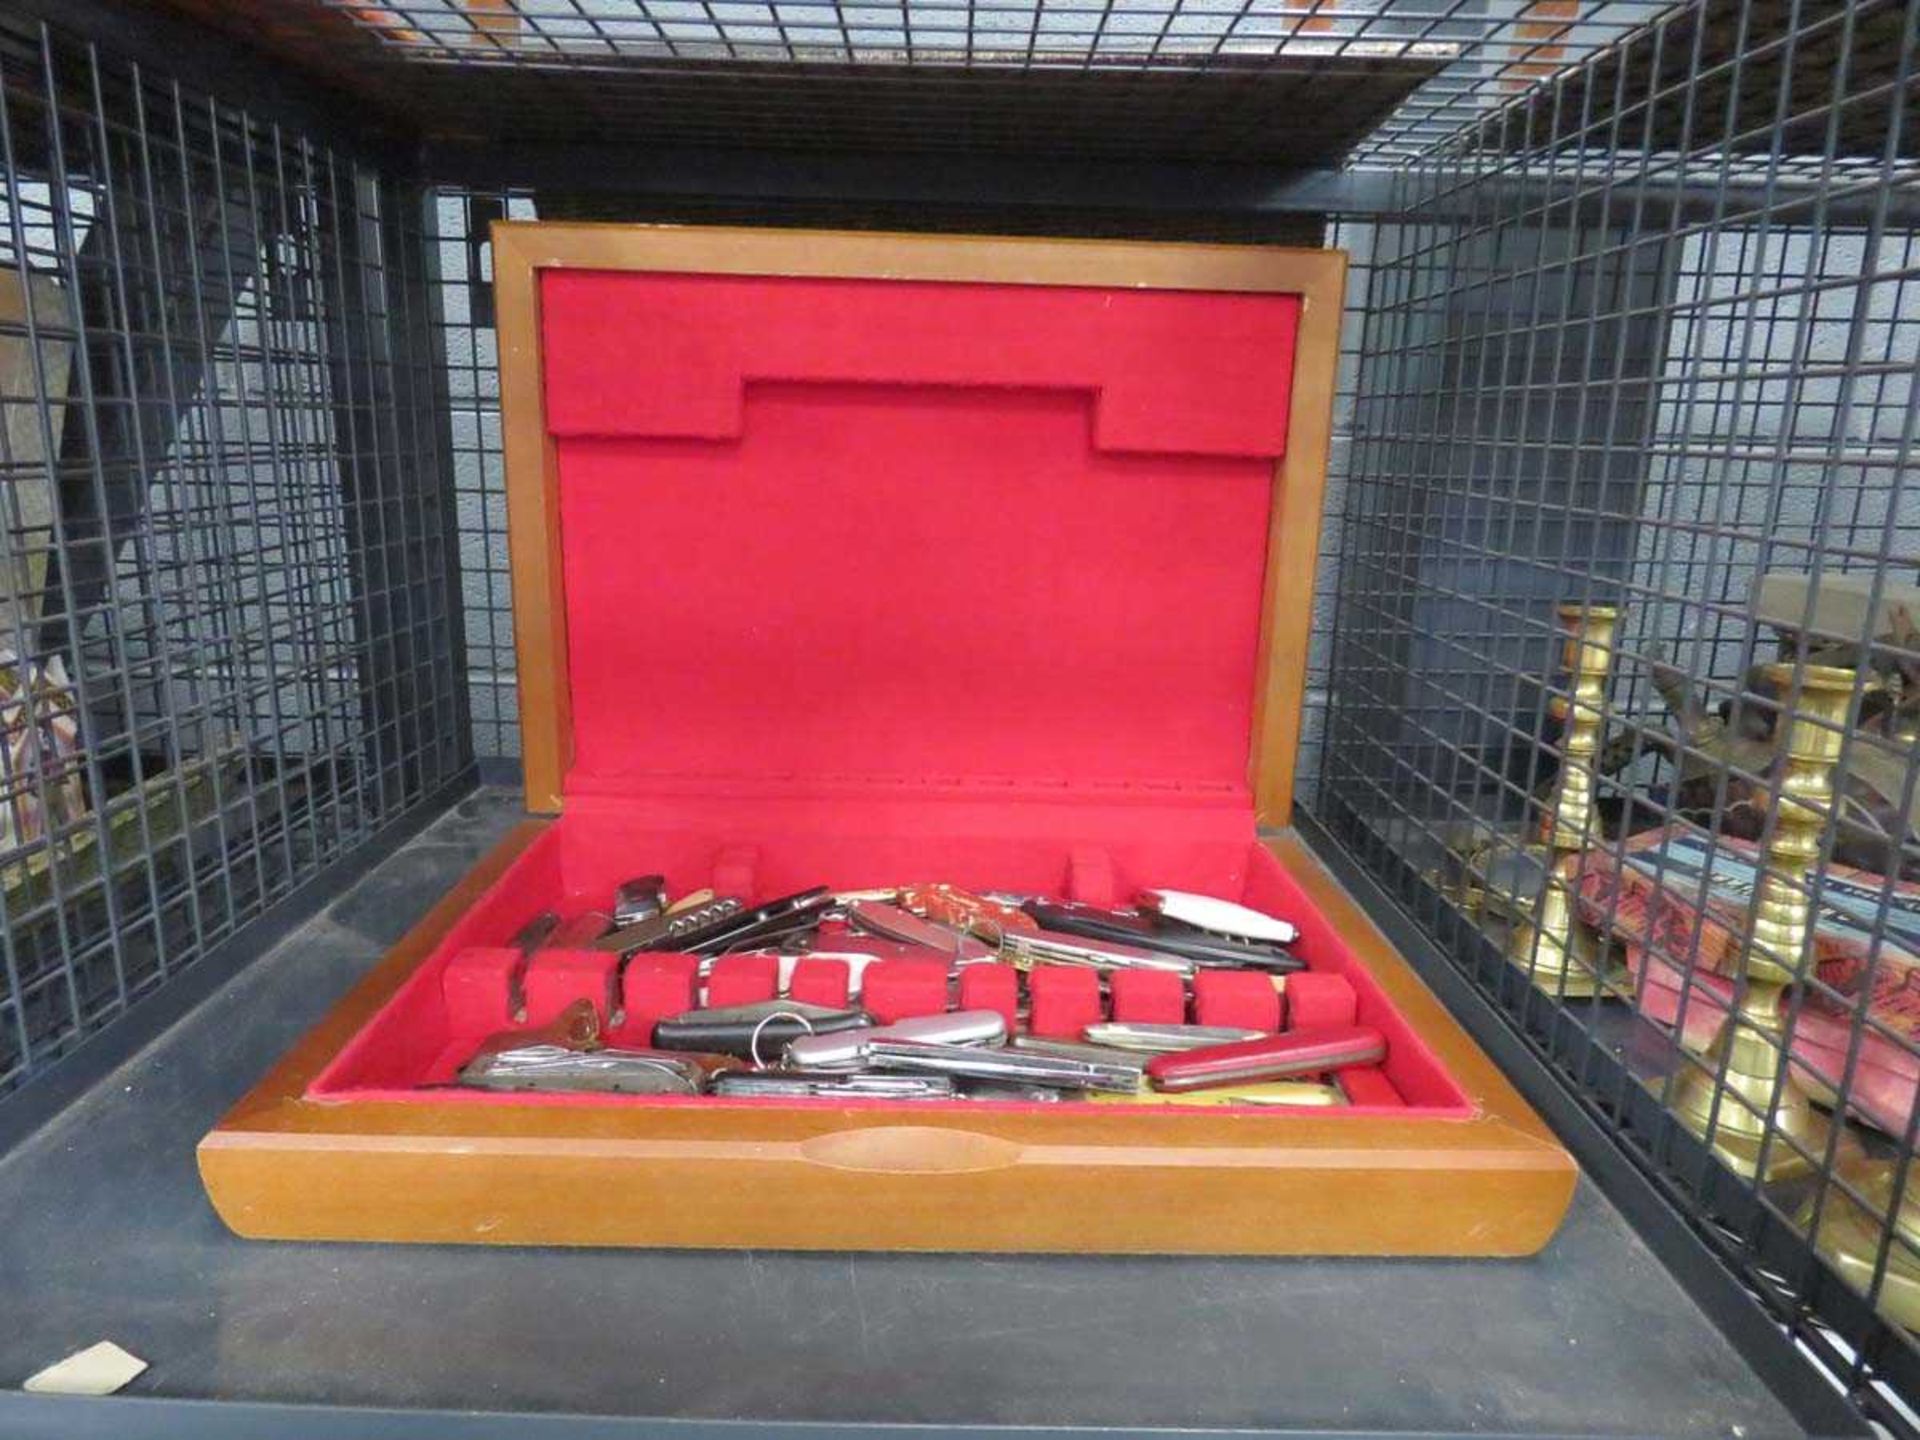 Cage containing a collection of pen knives